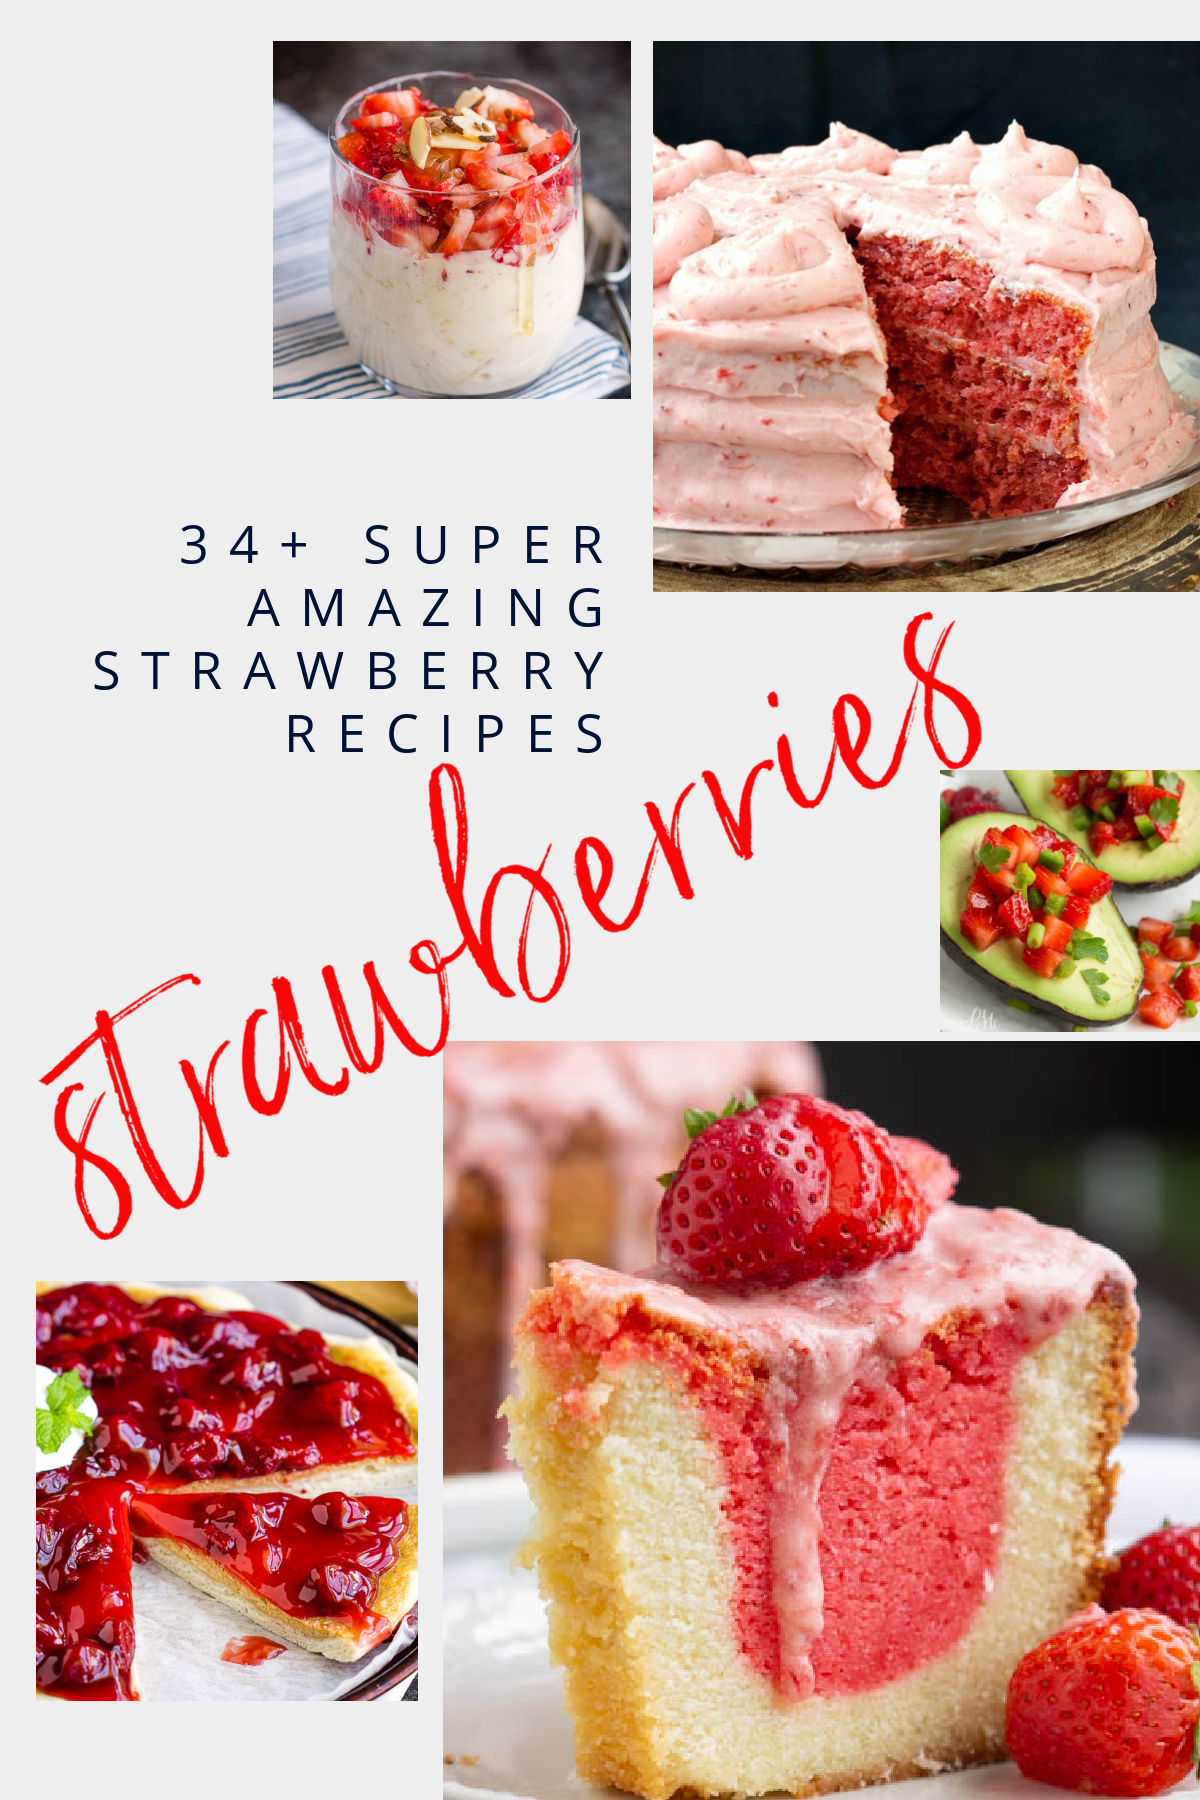 Big, bright, beautiful strawberries are featured in this recipe roundup.